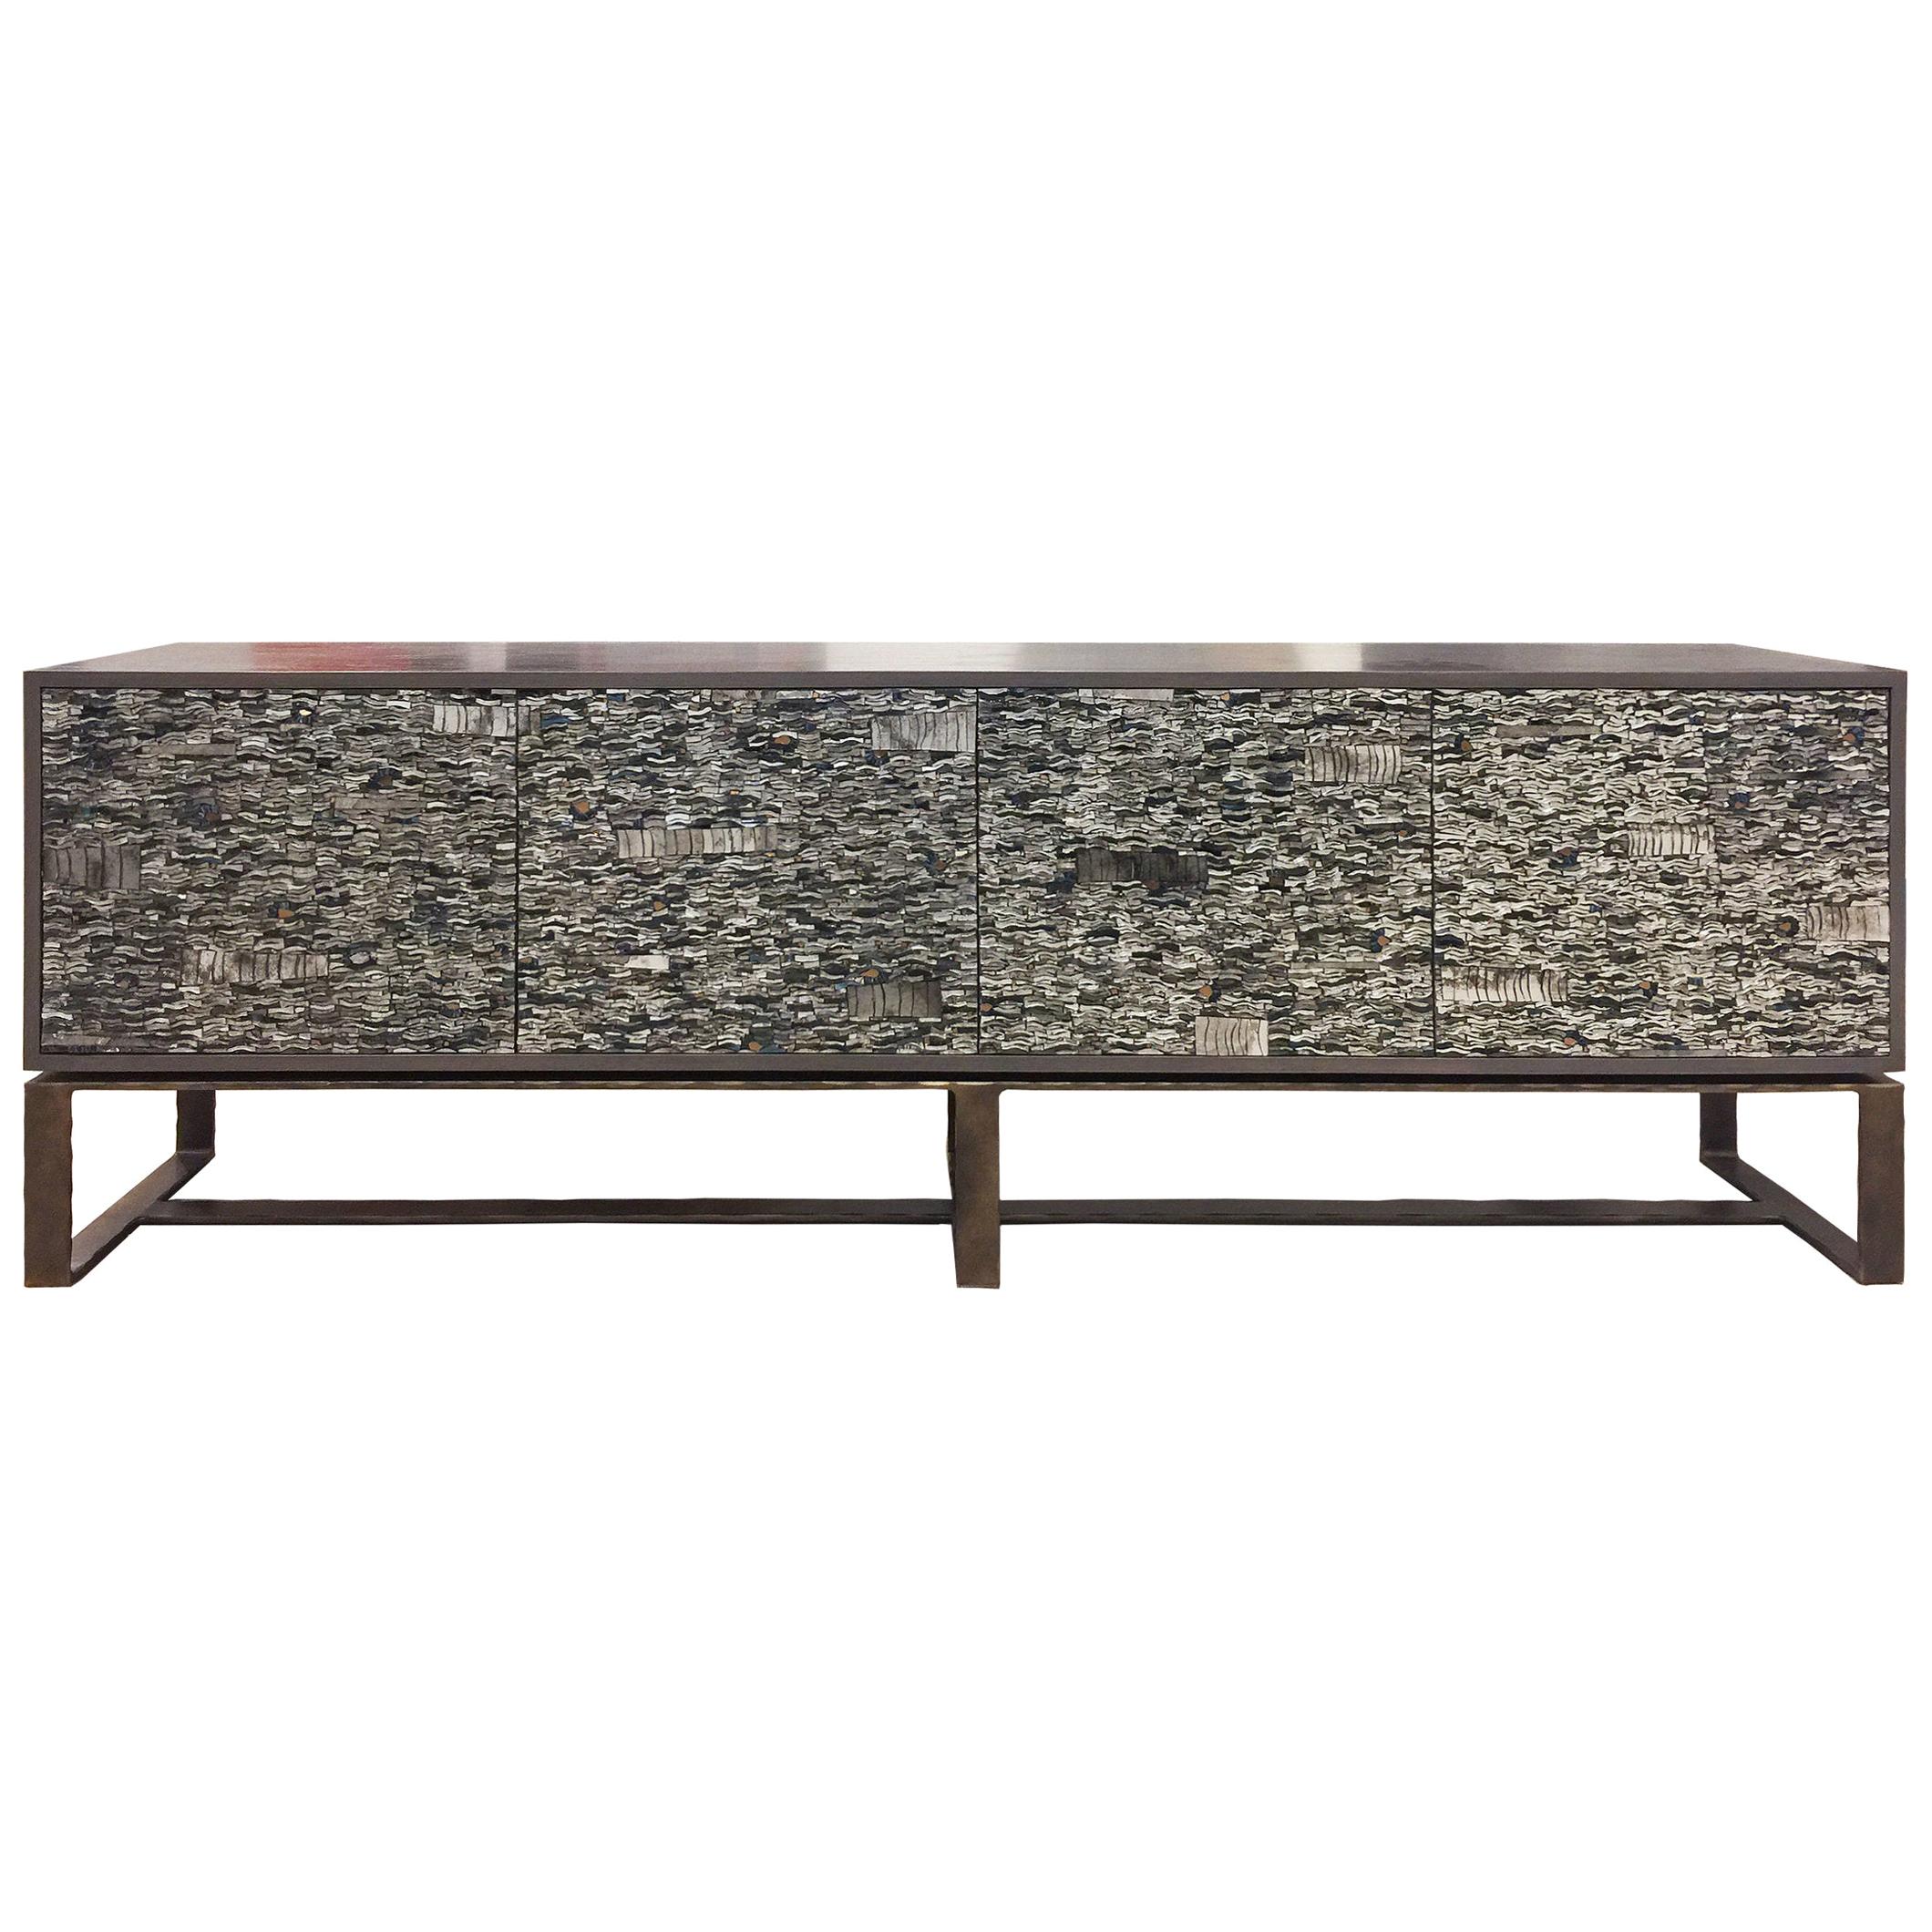 Modern Ravenna 4-Door Buffet with Forged Metal by Ercole Home For Sale